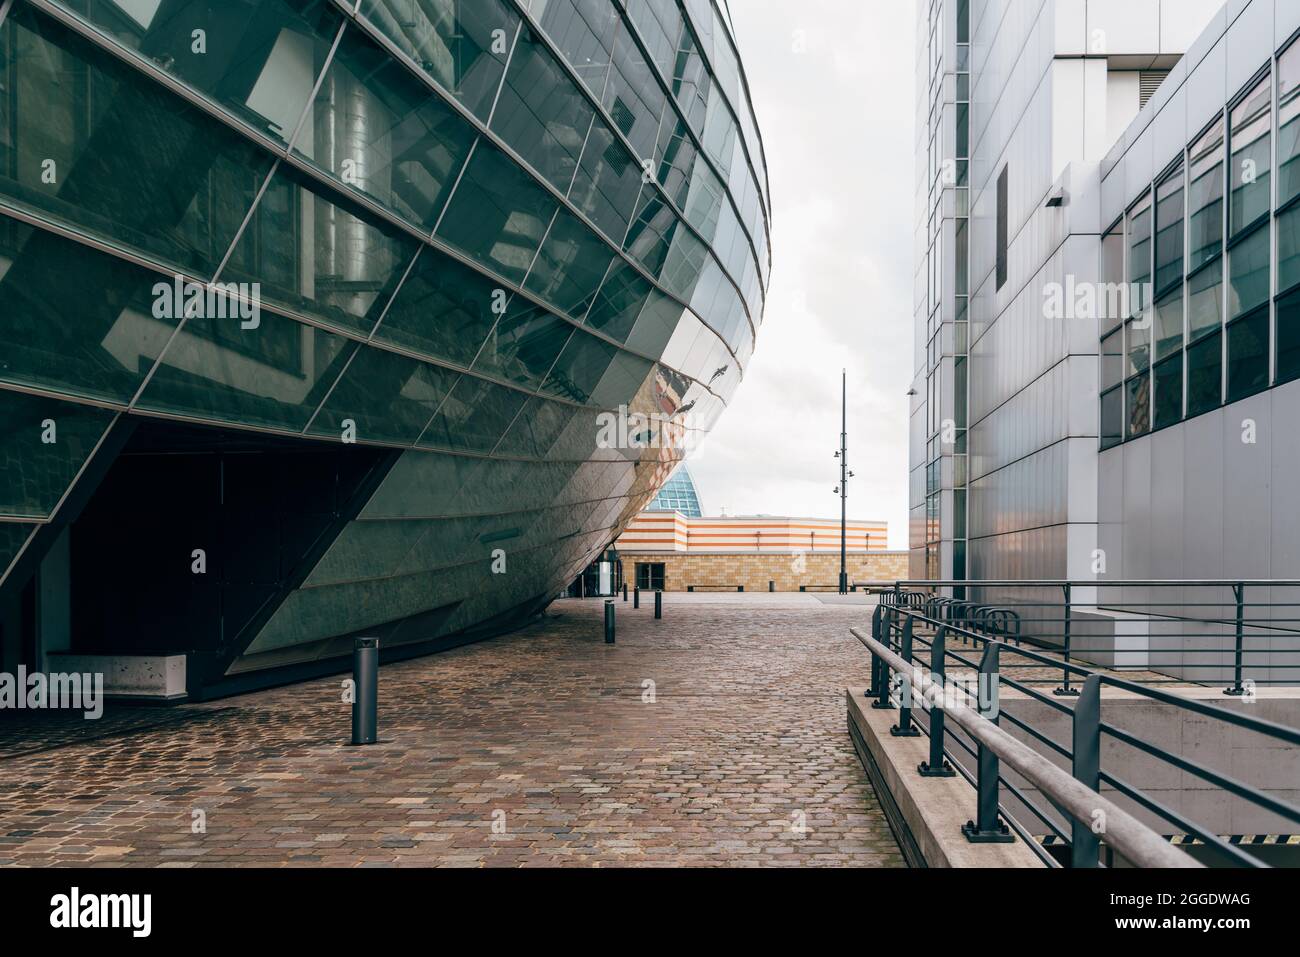 Bremerhaven, Germany - August 6 2019: Klimahaus, a museum on climate and climate change at the harbour of Bremerhaven. Stormy day of summer Stock Photo